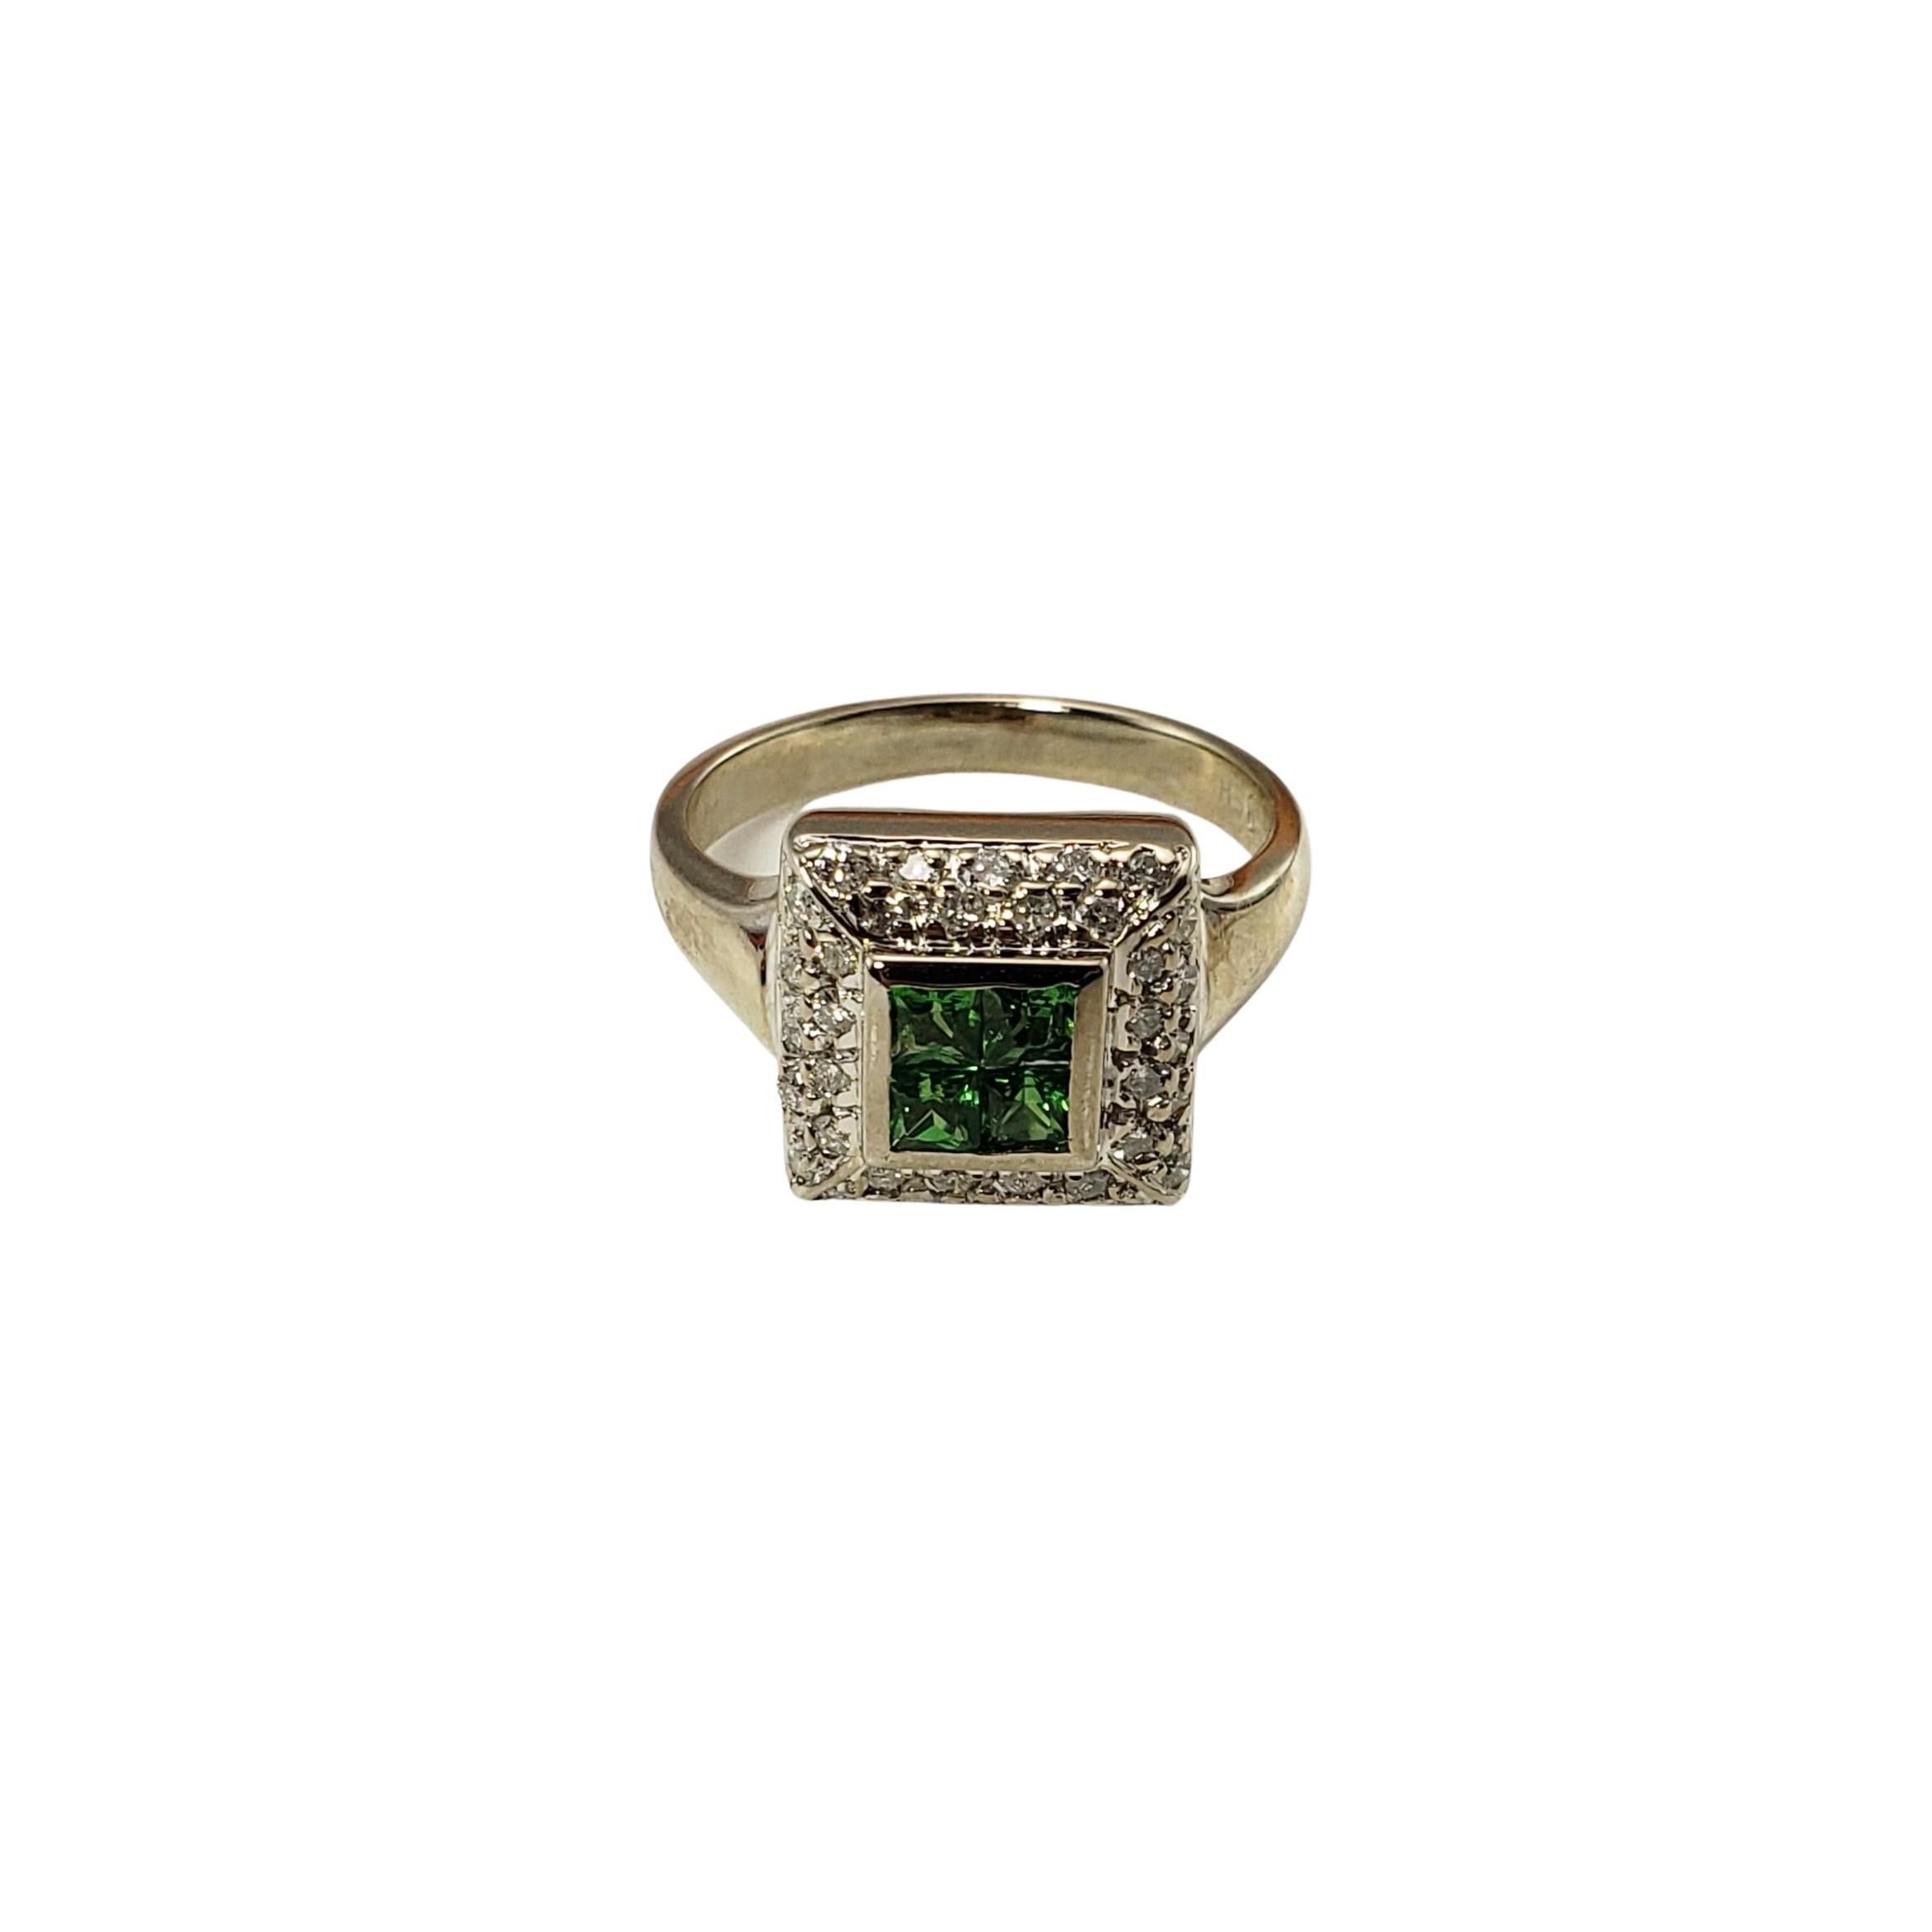 14 Karat White Gold Green Tourmaline and Diamond Ring Size 6.5 GAI Certified-

This stunning ring features four princess cut green tourmaline gemstones and 36 round brilliant cut diamonds set in classic 14K white gold.  Width:  11 mm.  Shank:  2.5